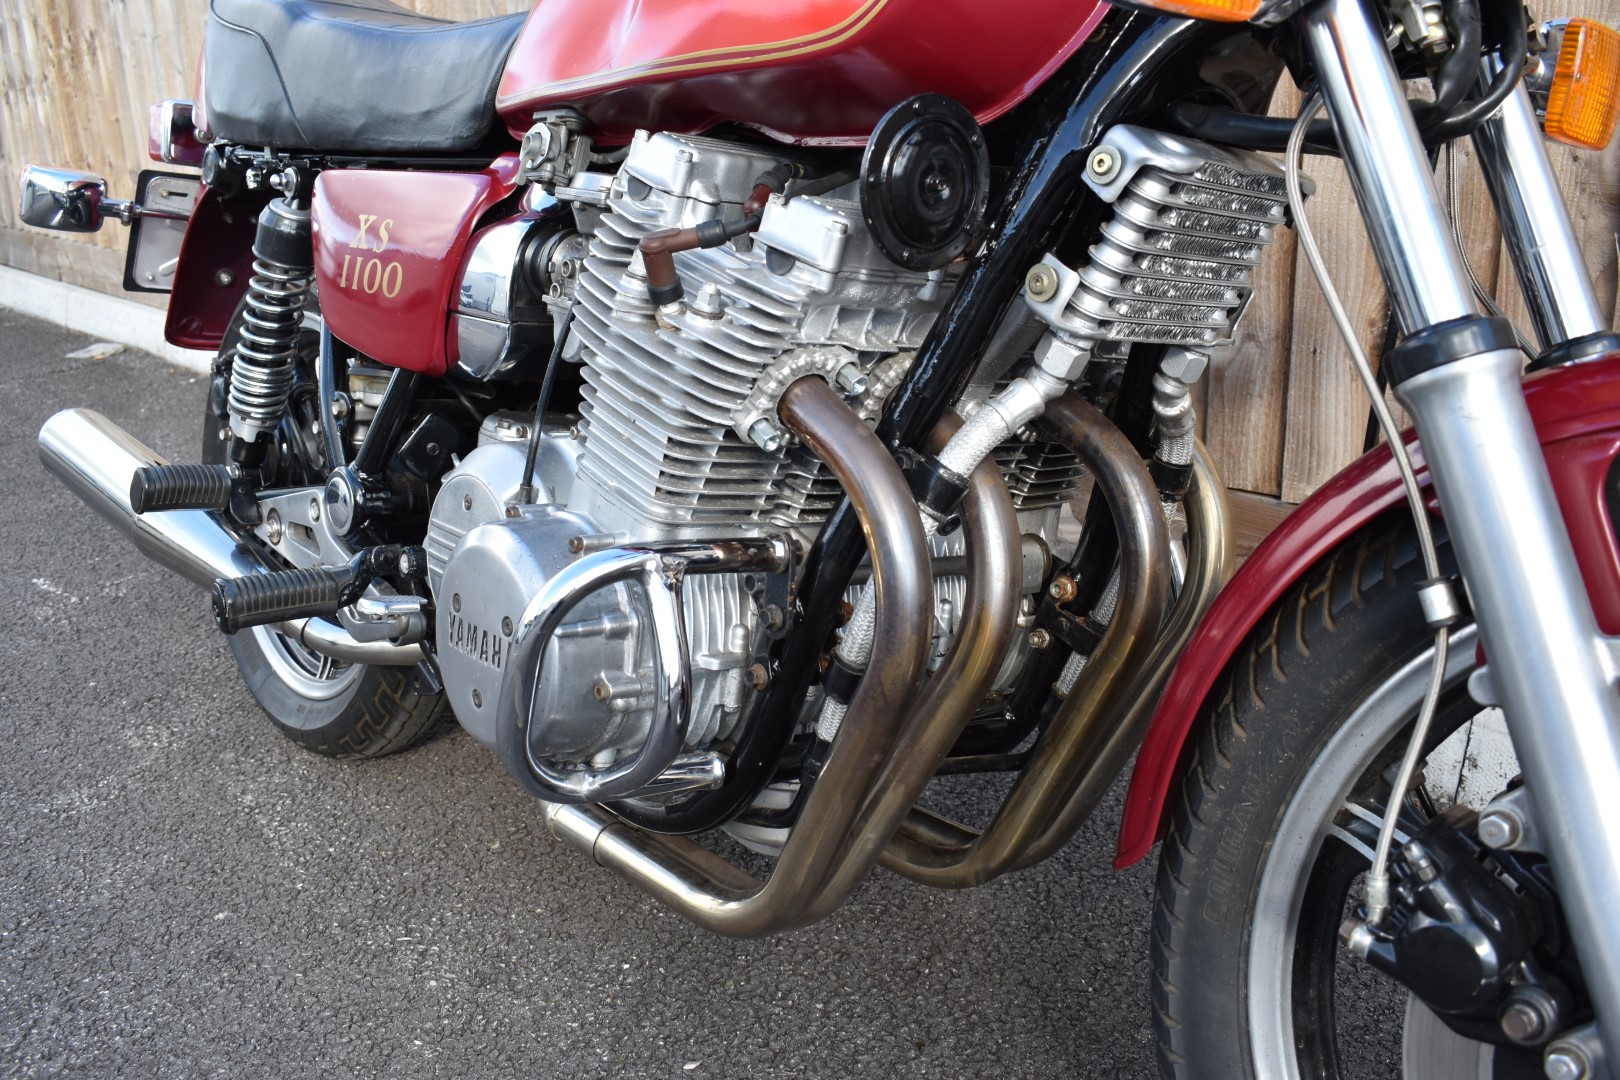 1980 Yamaha XS1100 motorbike registration NGS 439V, with V5c, used by the vendor for continental - Image 10 of 17